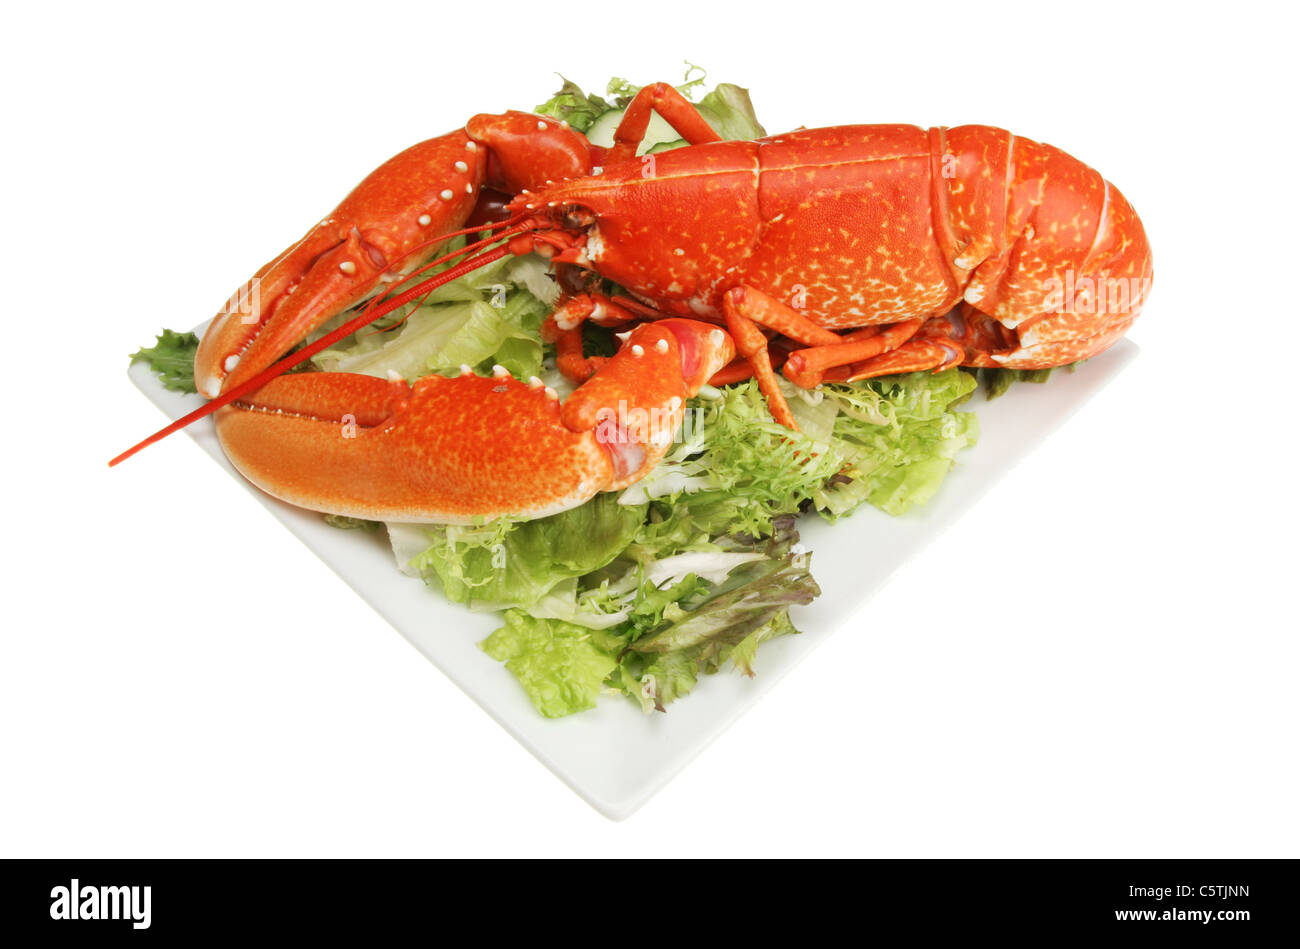 Whole cooked lobster on a plate of mixed green leaf salad Stock Photo